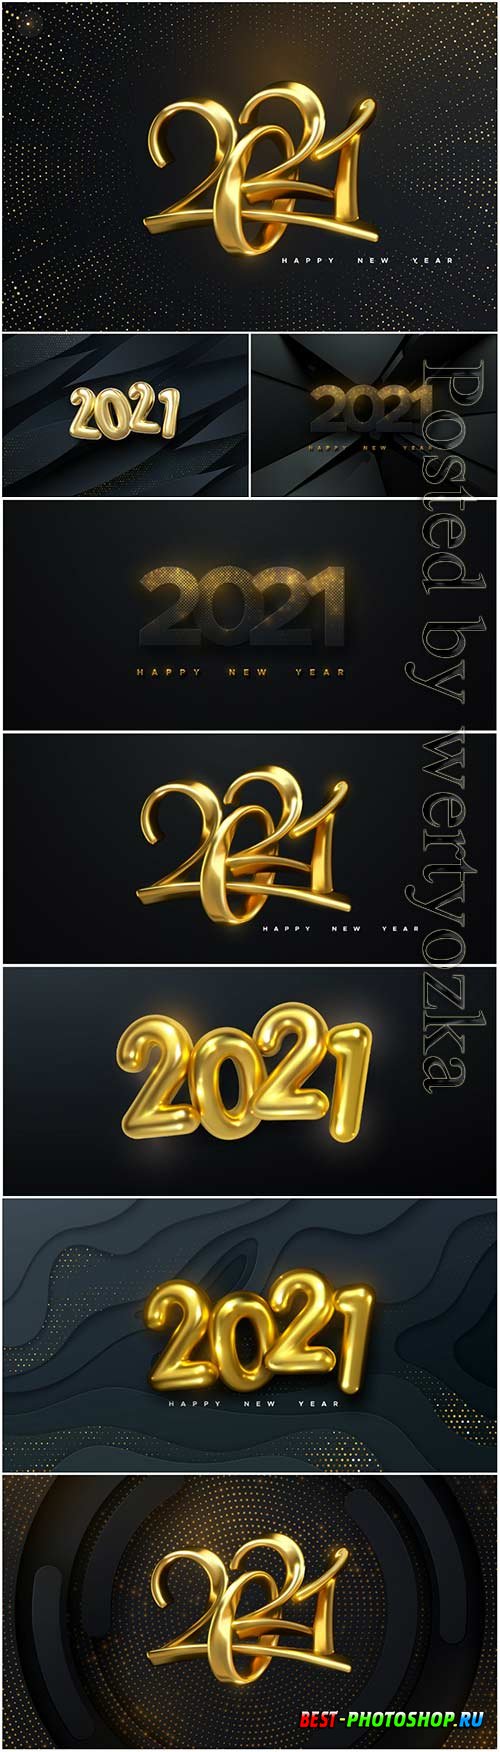 Happy new year background with realistic gold numbers 2021